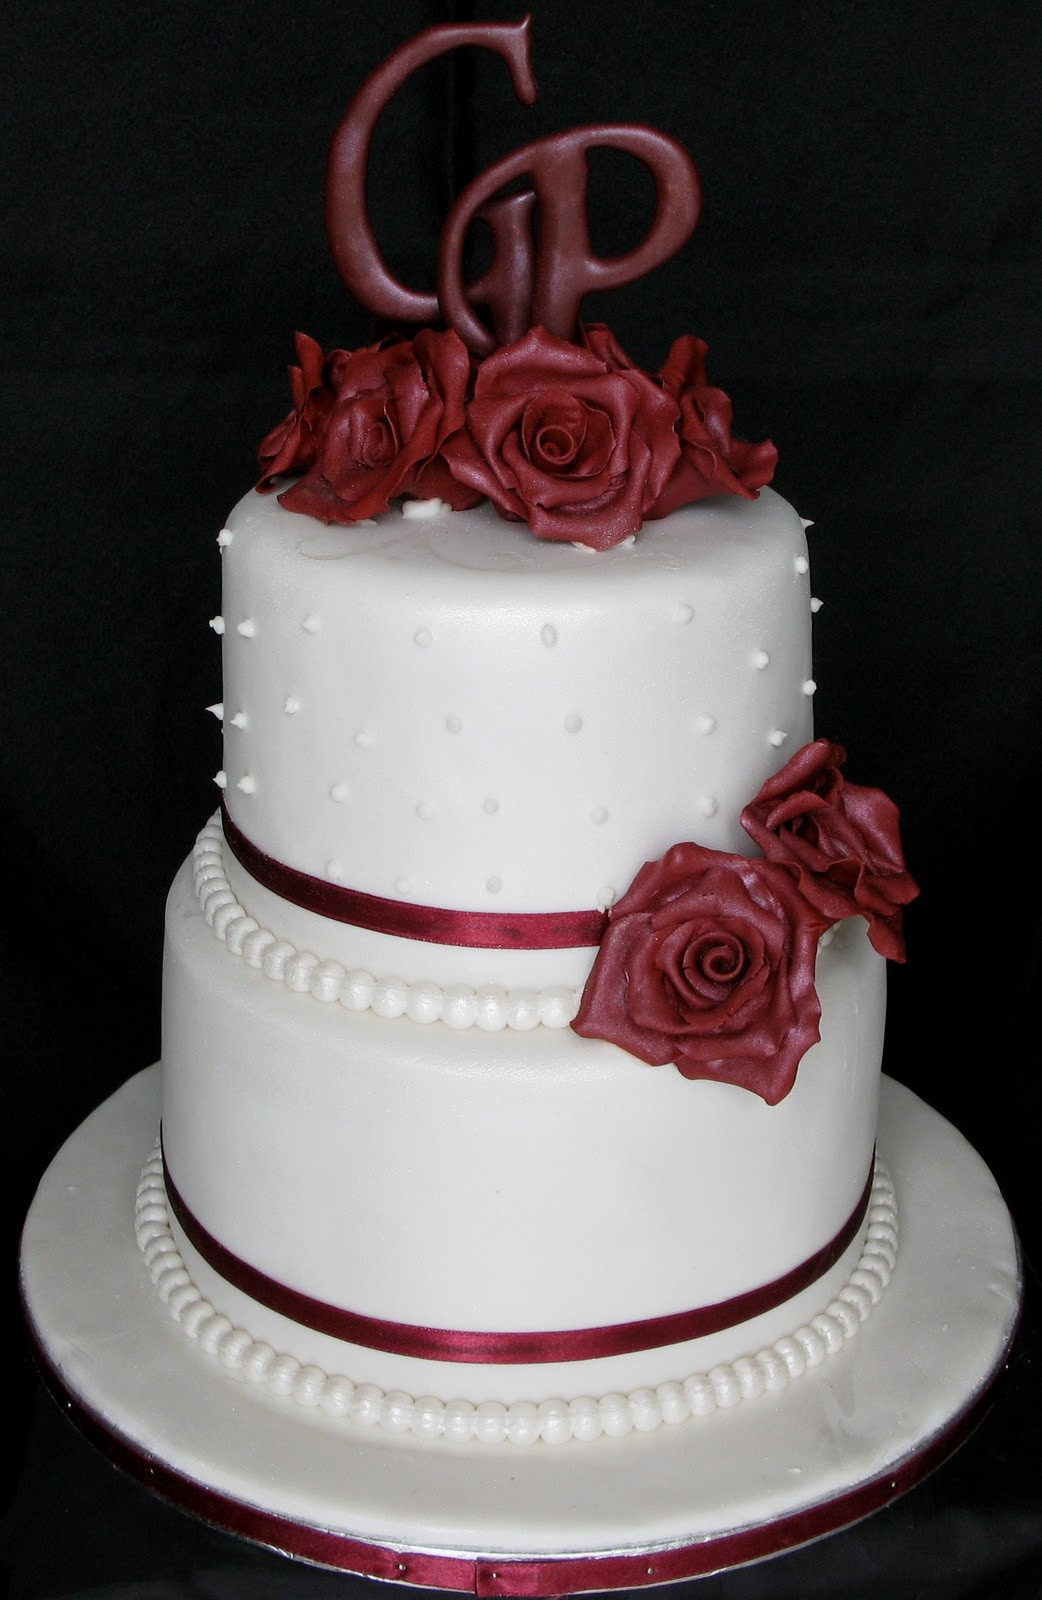 2 Tier Wedding Cake
 Sugarcraft by Soni Two Layer Wedding Cake with Roses